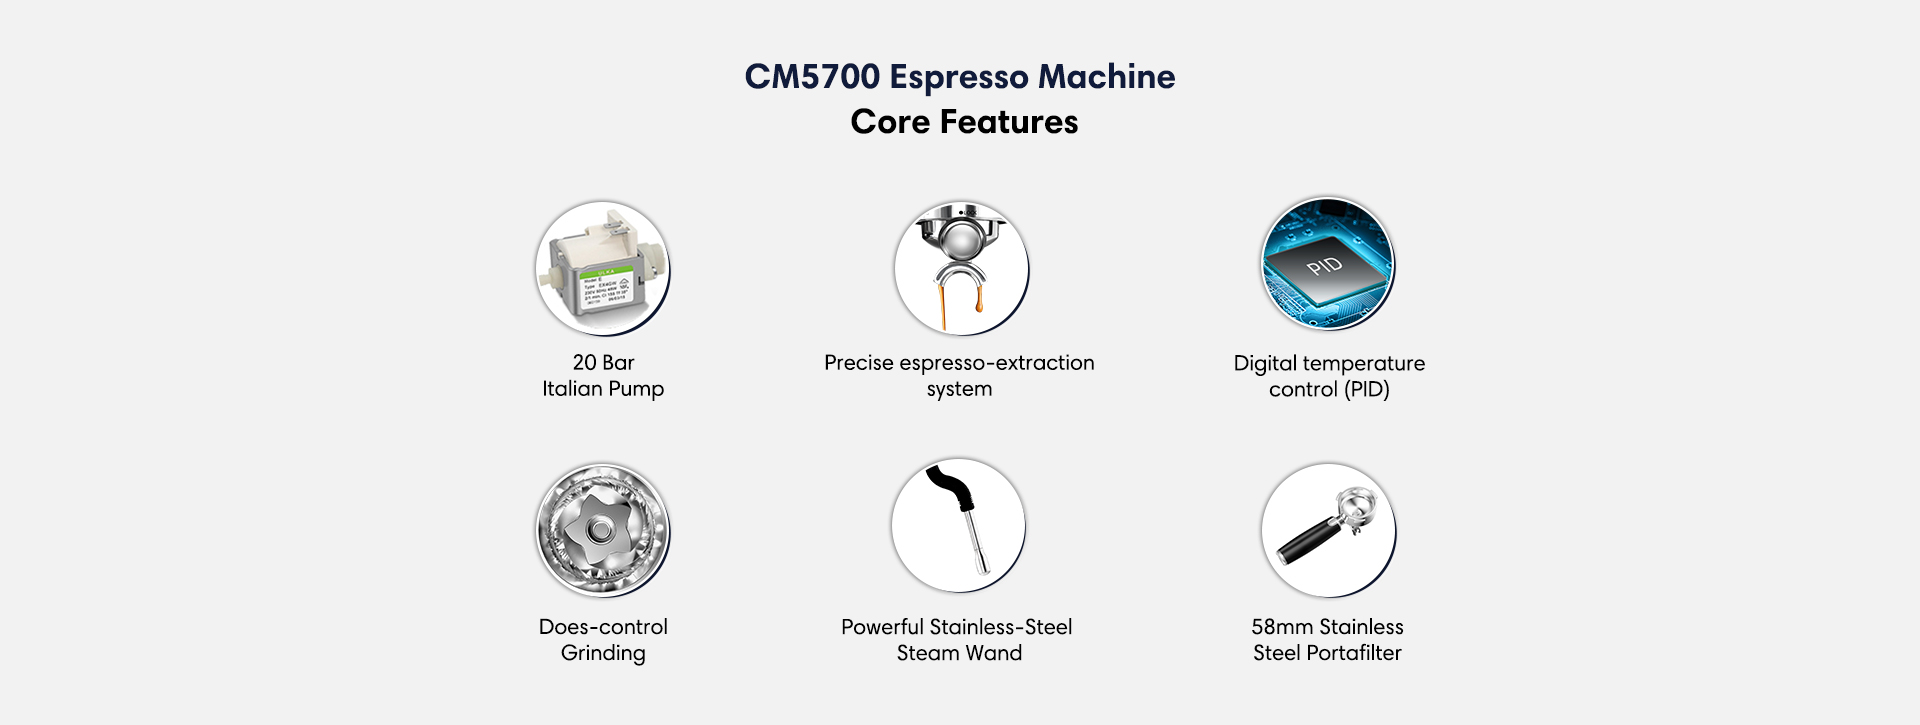 CM5700 espresso machine core features 20 bar Italian pump precise espresso-extraction system digital temperature control dose-control grinding stainless and powerful milk frother 58mm stainless steel portafilter